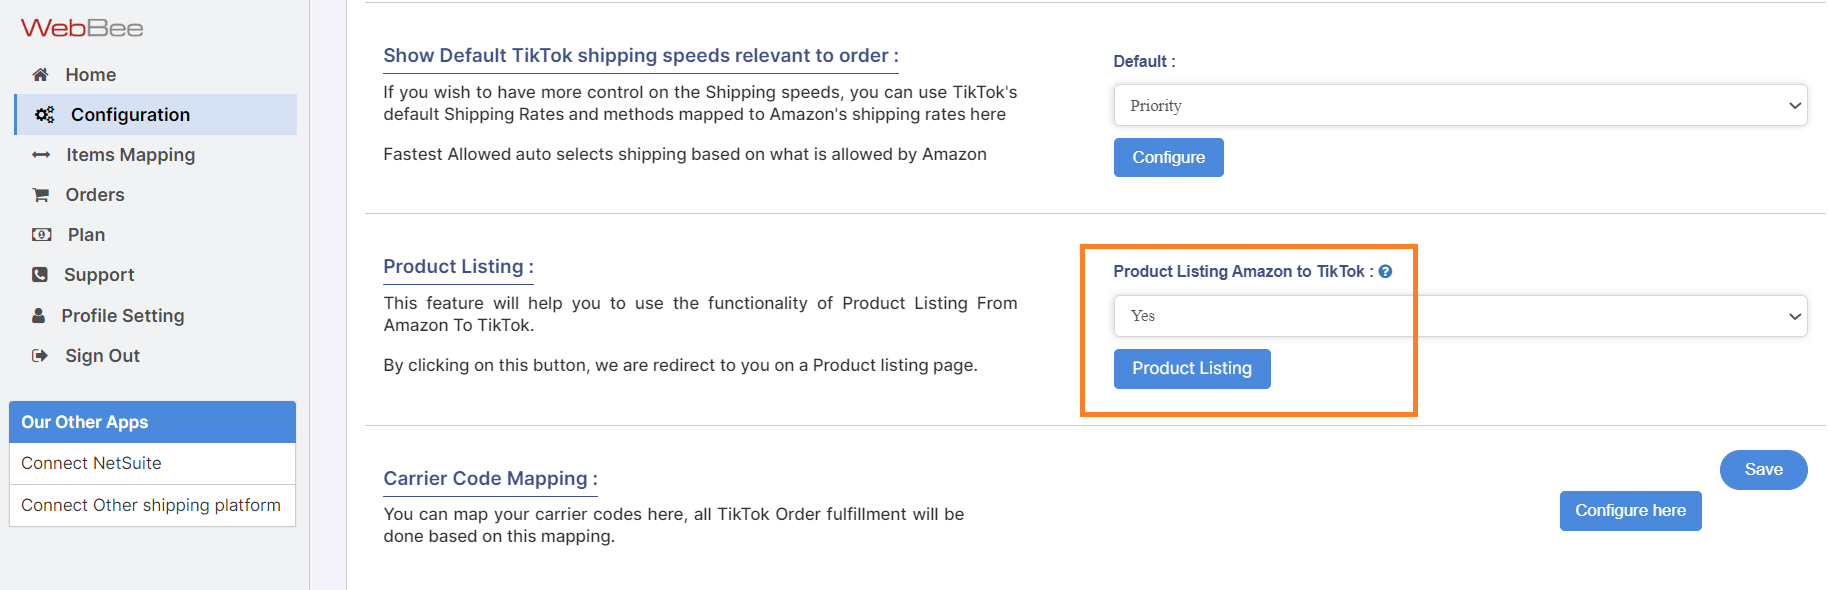 Products Listing from Amazon MCF to TikTok Shop